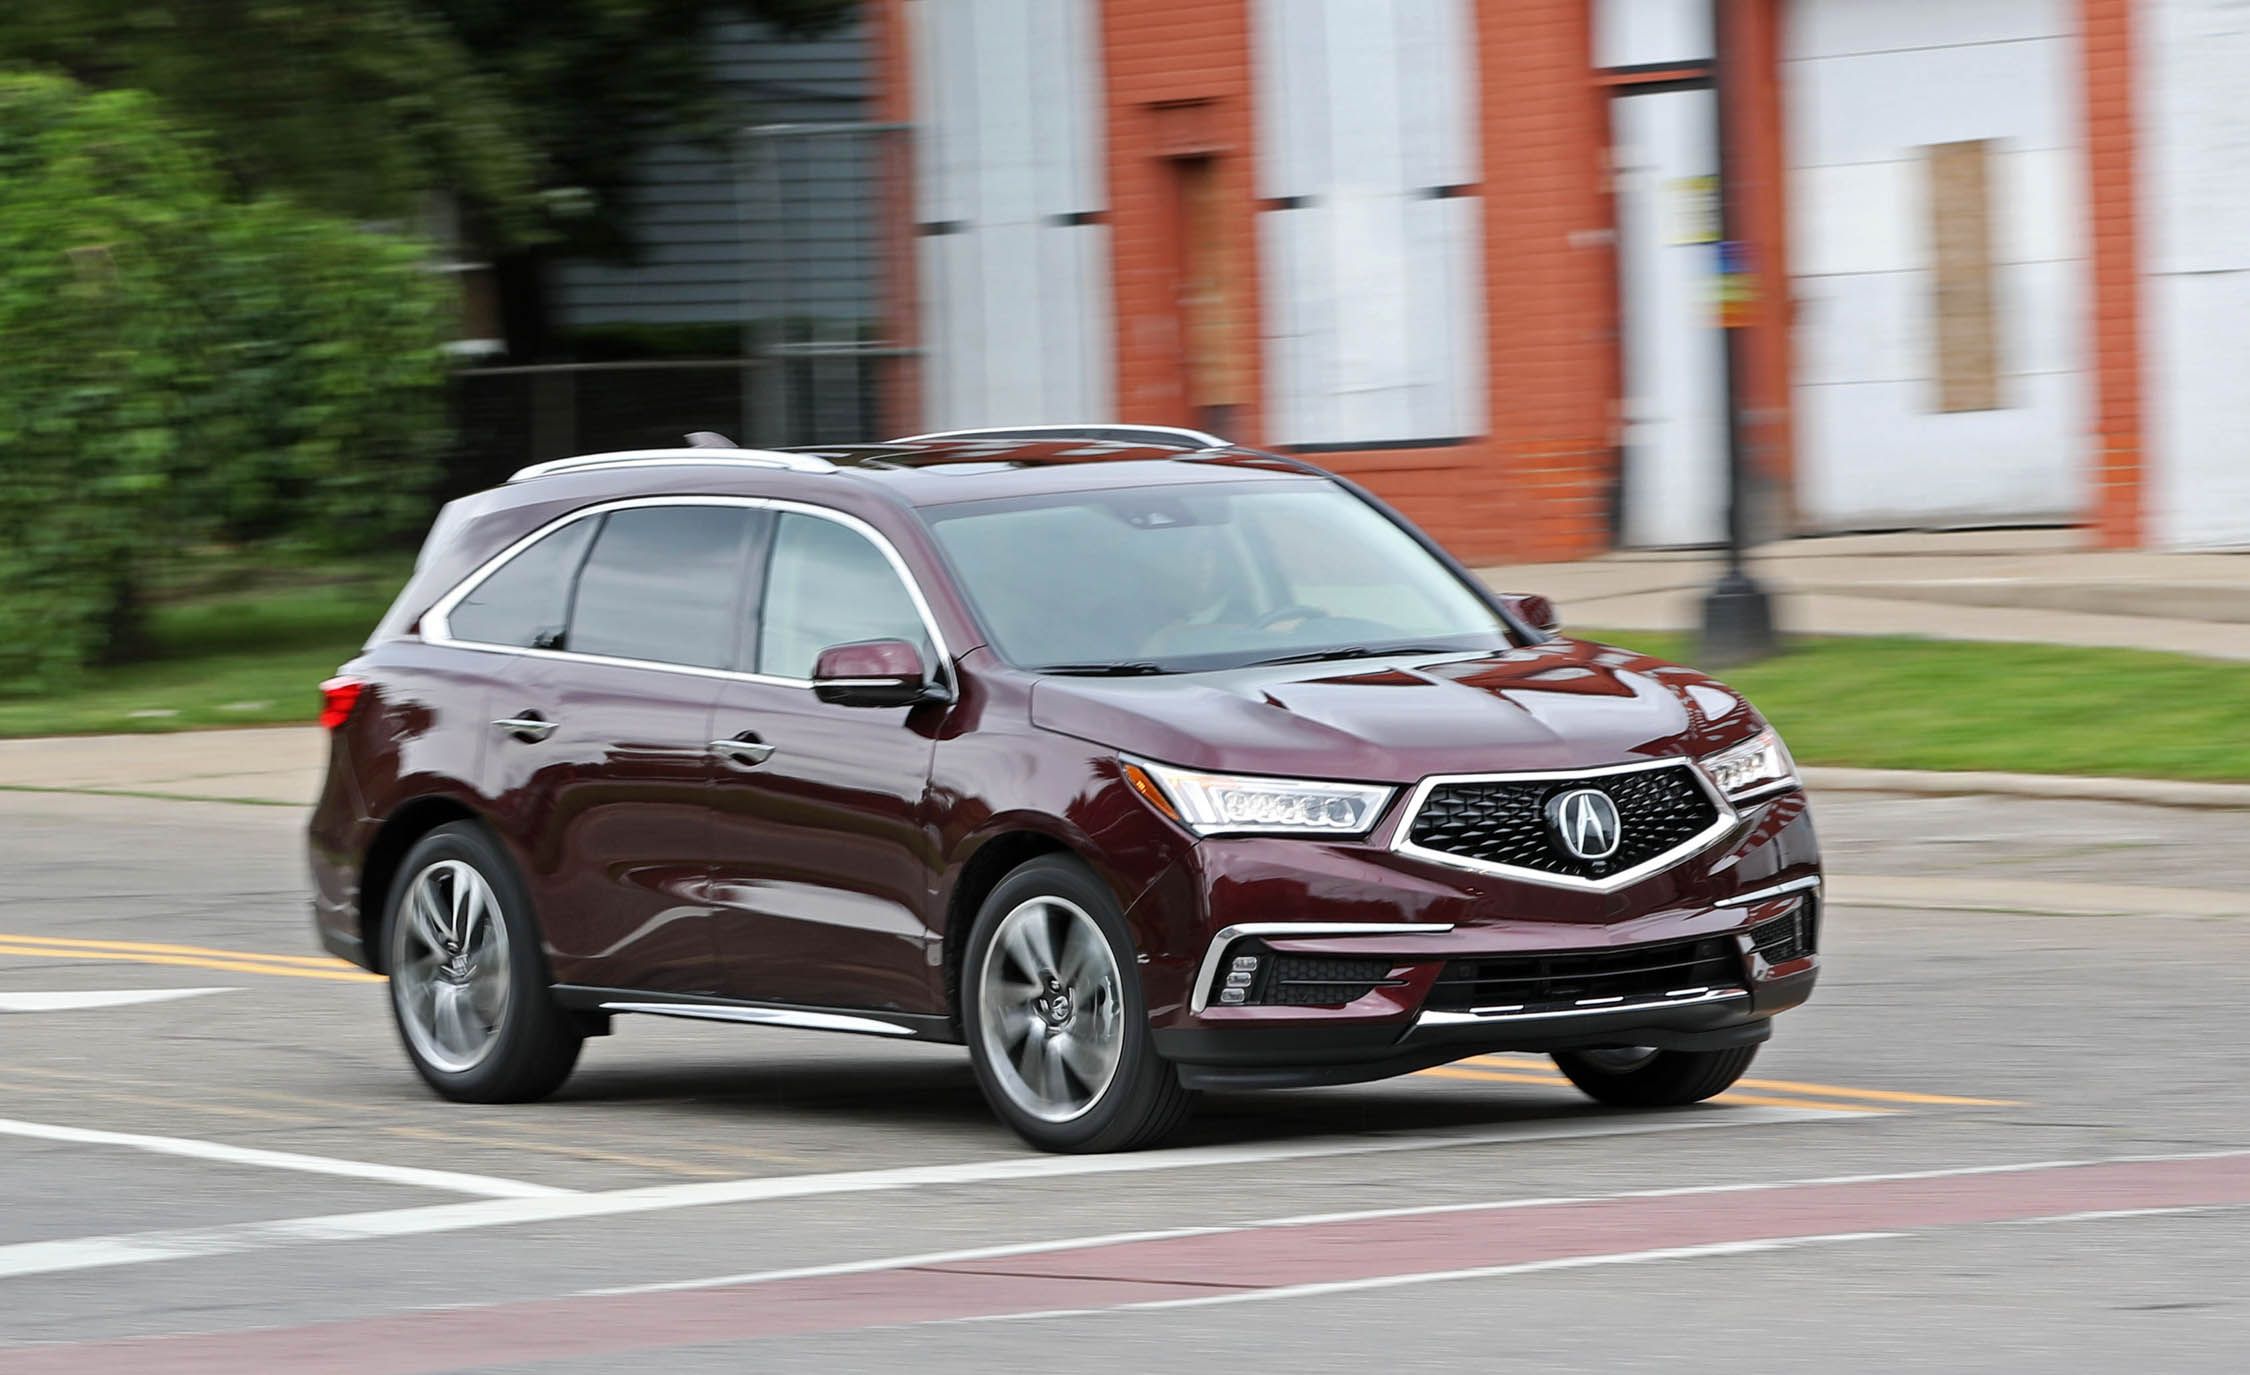 2017 Acura Mdx Test Drive Front And Side View (View 7 of 22)